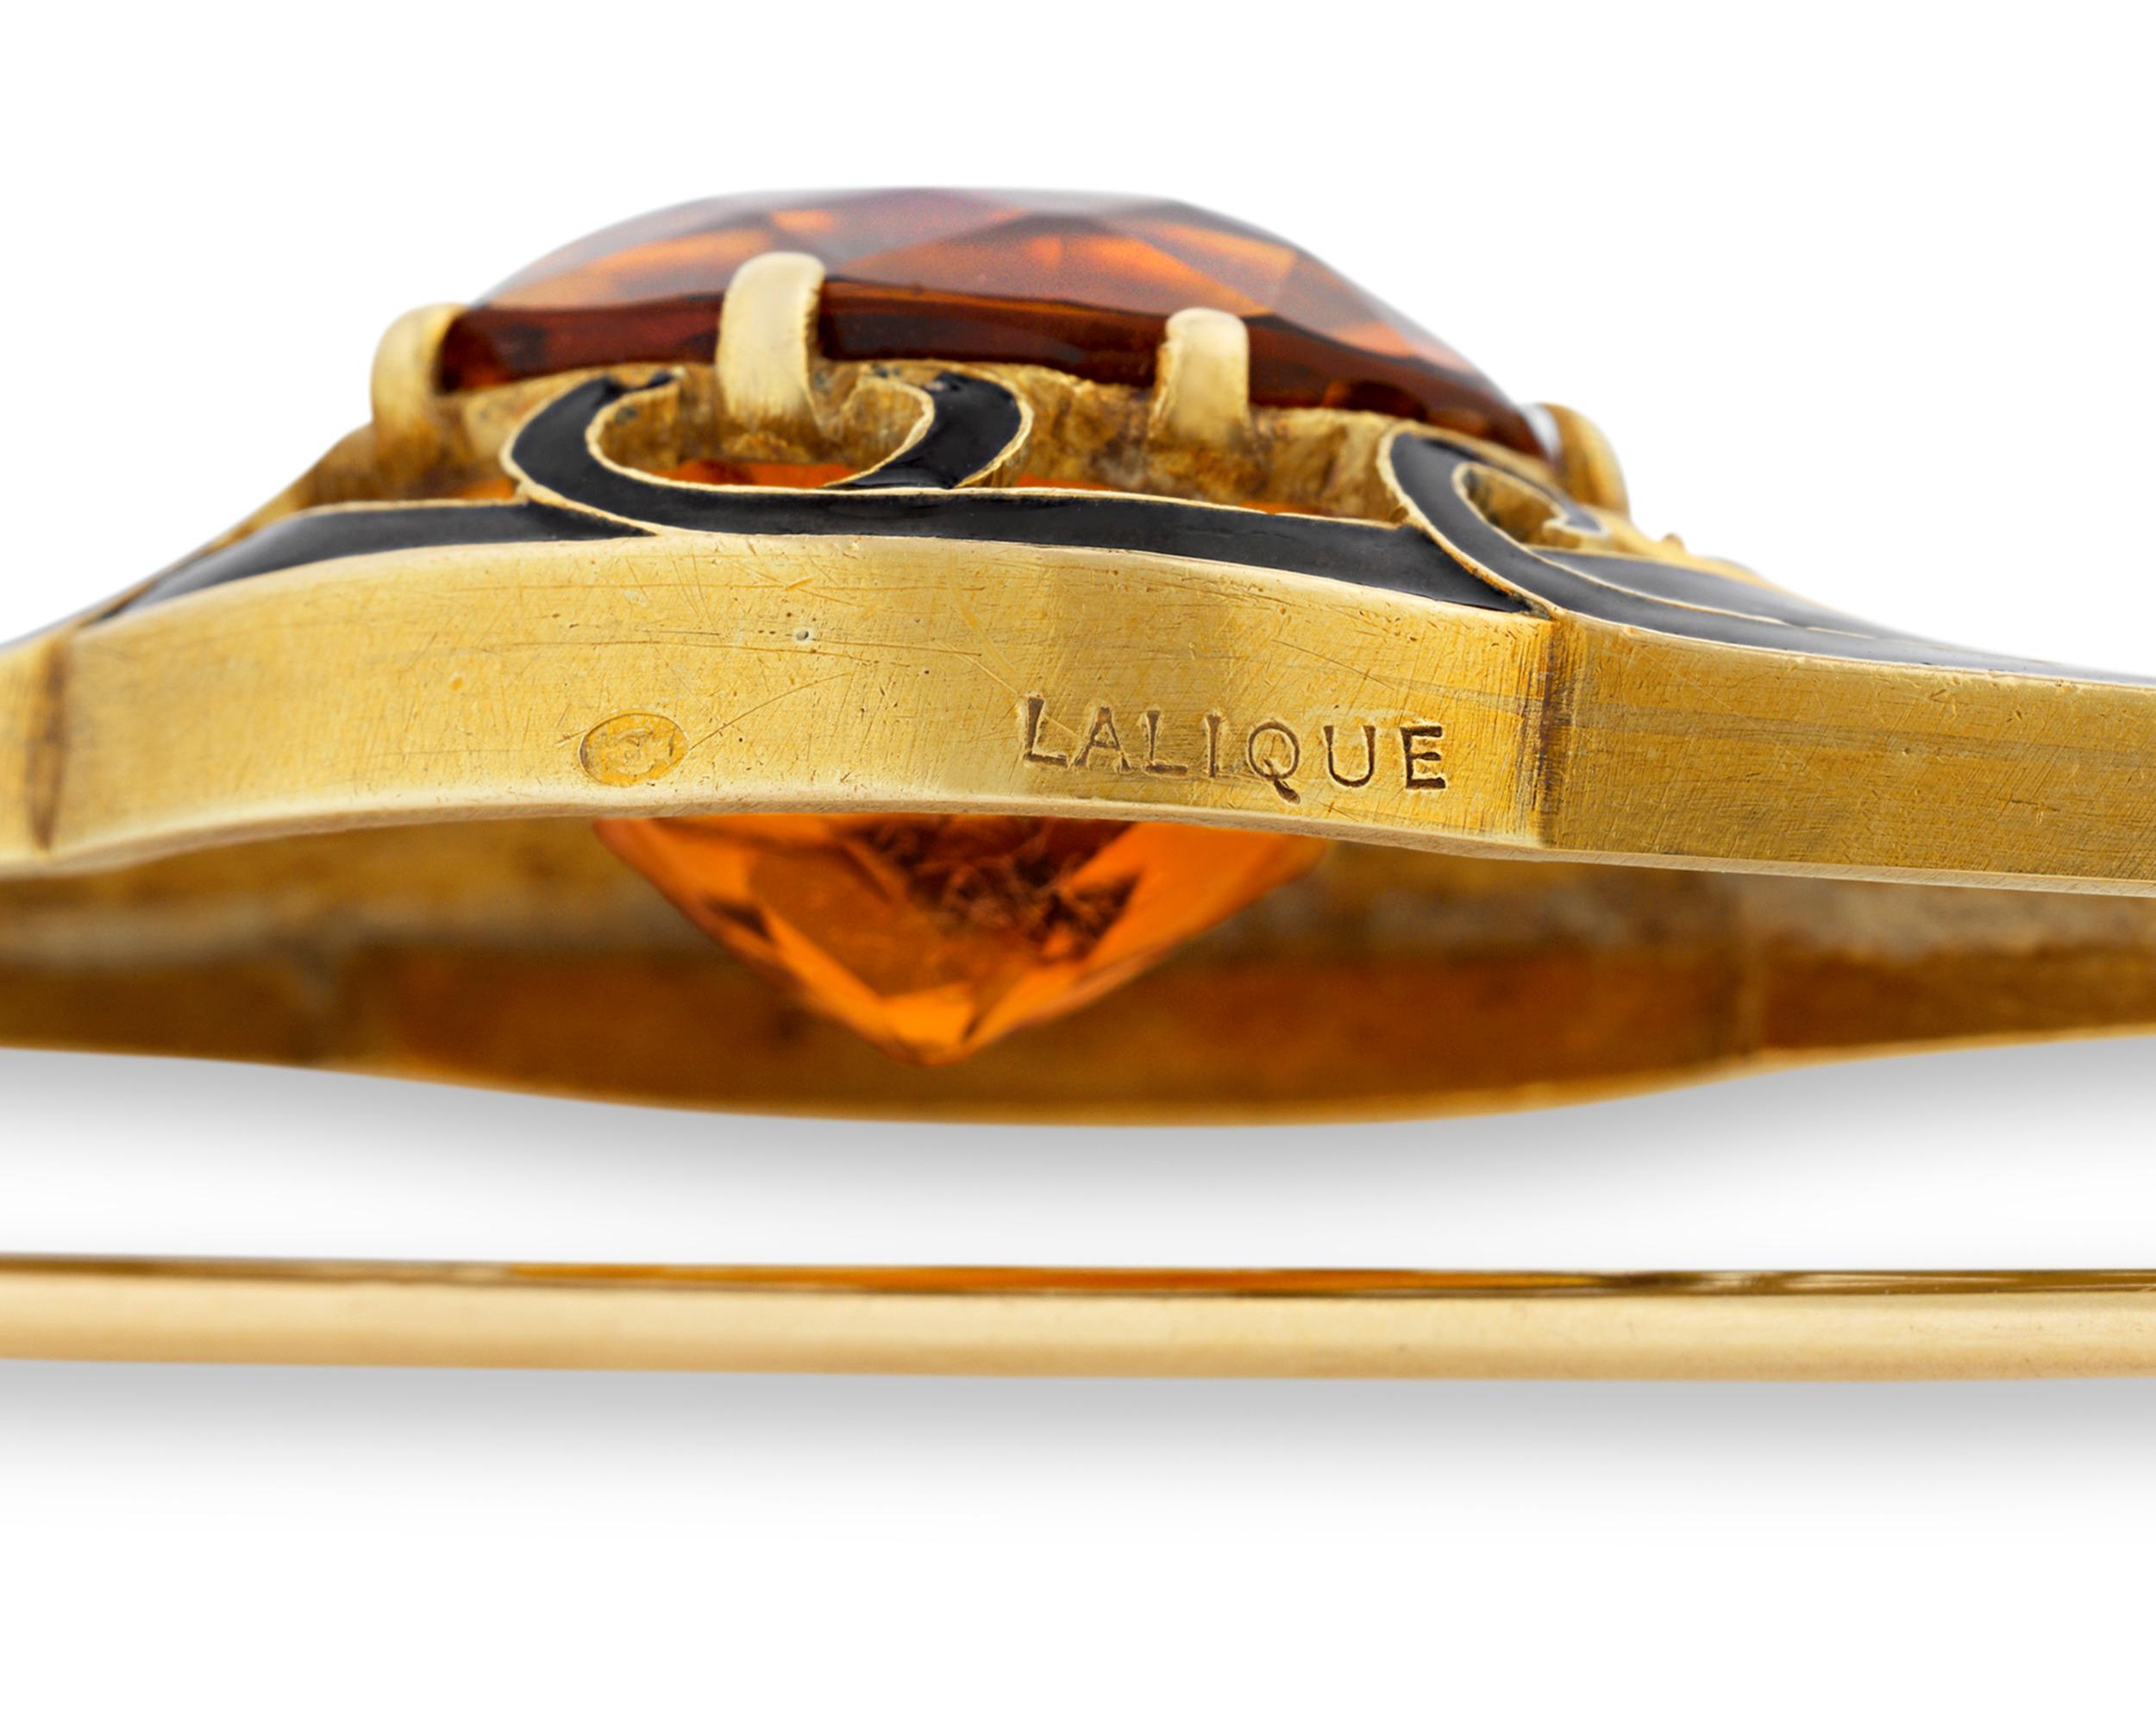 A quintessential example of Art Nouveau jewelry design, this stunning citrine and enamel brooch is the work of the legendary artisan René Lalique. Elegantly curved panels of black enamel and gold highlight the citrine's incredible vibrancy of color.